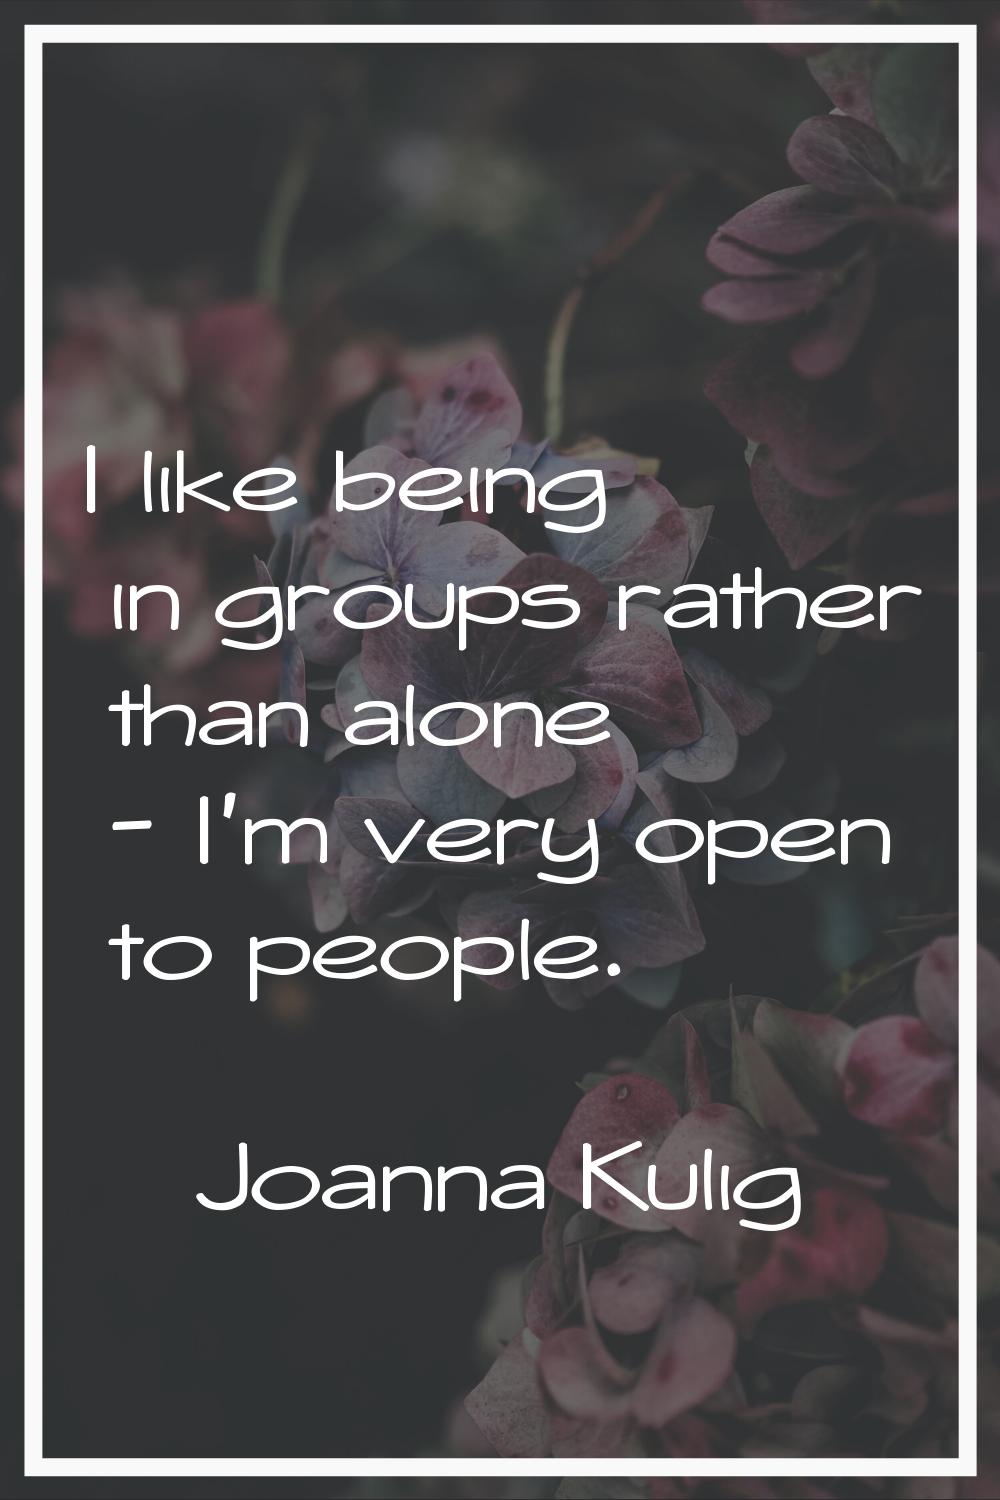 I like being in groups rather than alone - I'm very open to people.